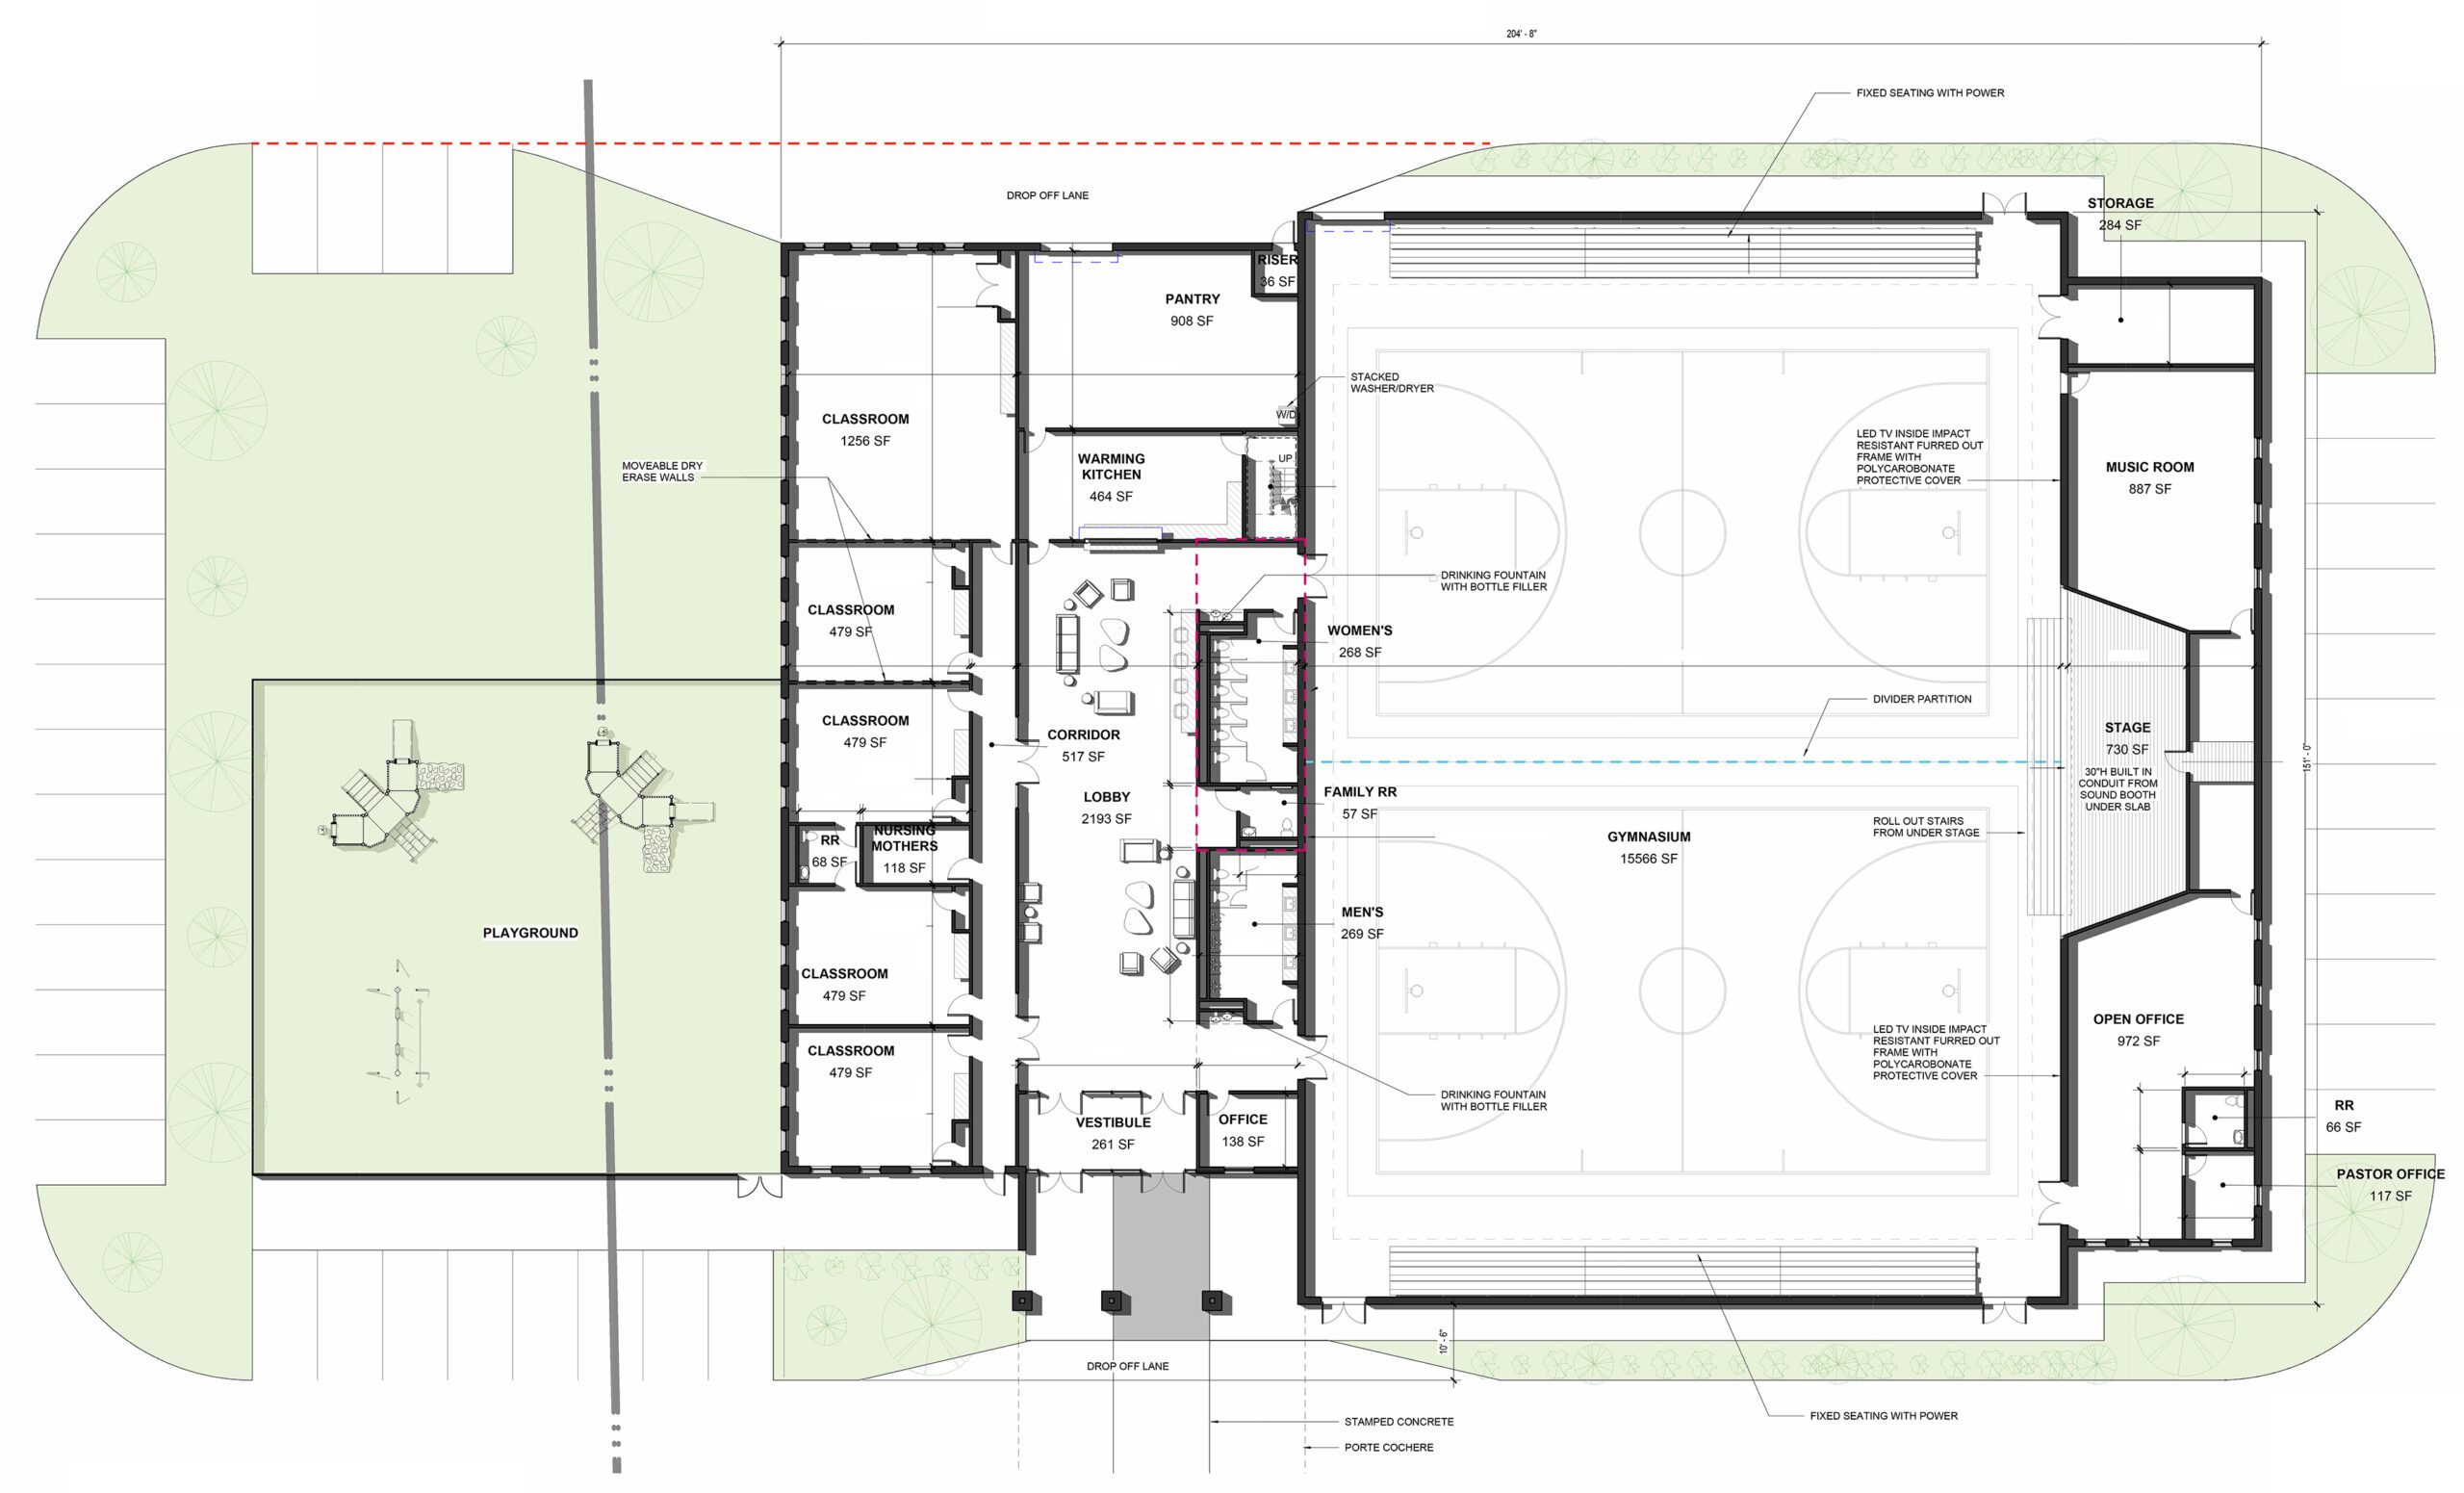 Blueprint-style floor plan of proposed Grace Place Community Center